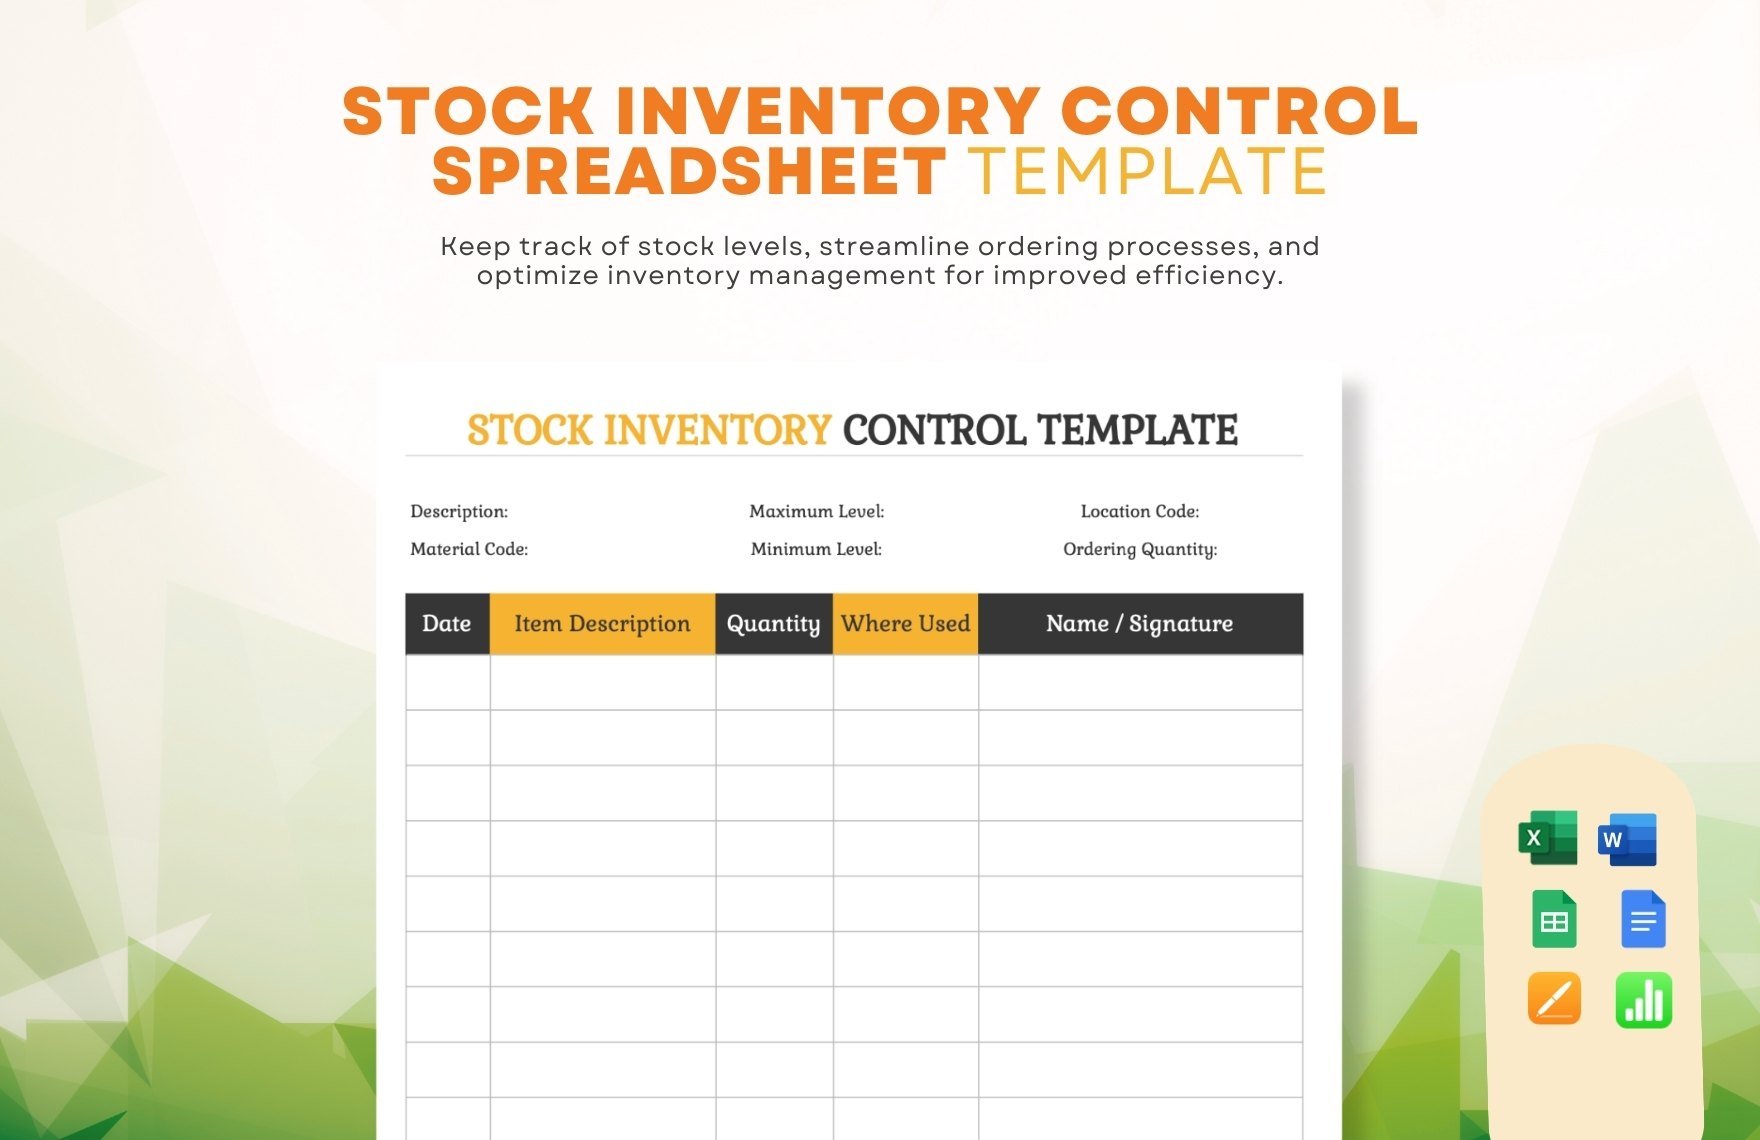 Stock Inventory Control Spreadsheet Template in Word, Google Docs, Excel, Google Sheets, Apple Pages, Apple Numbers